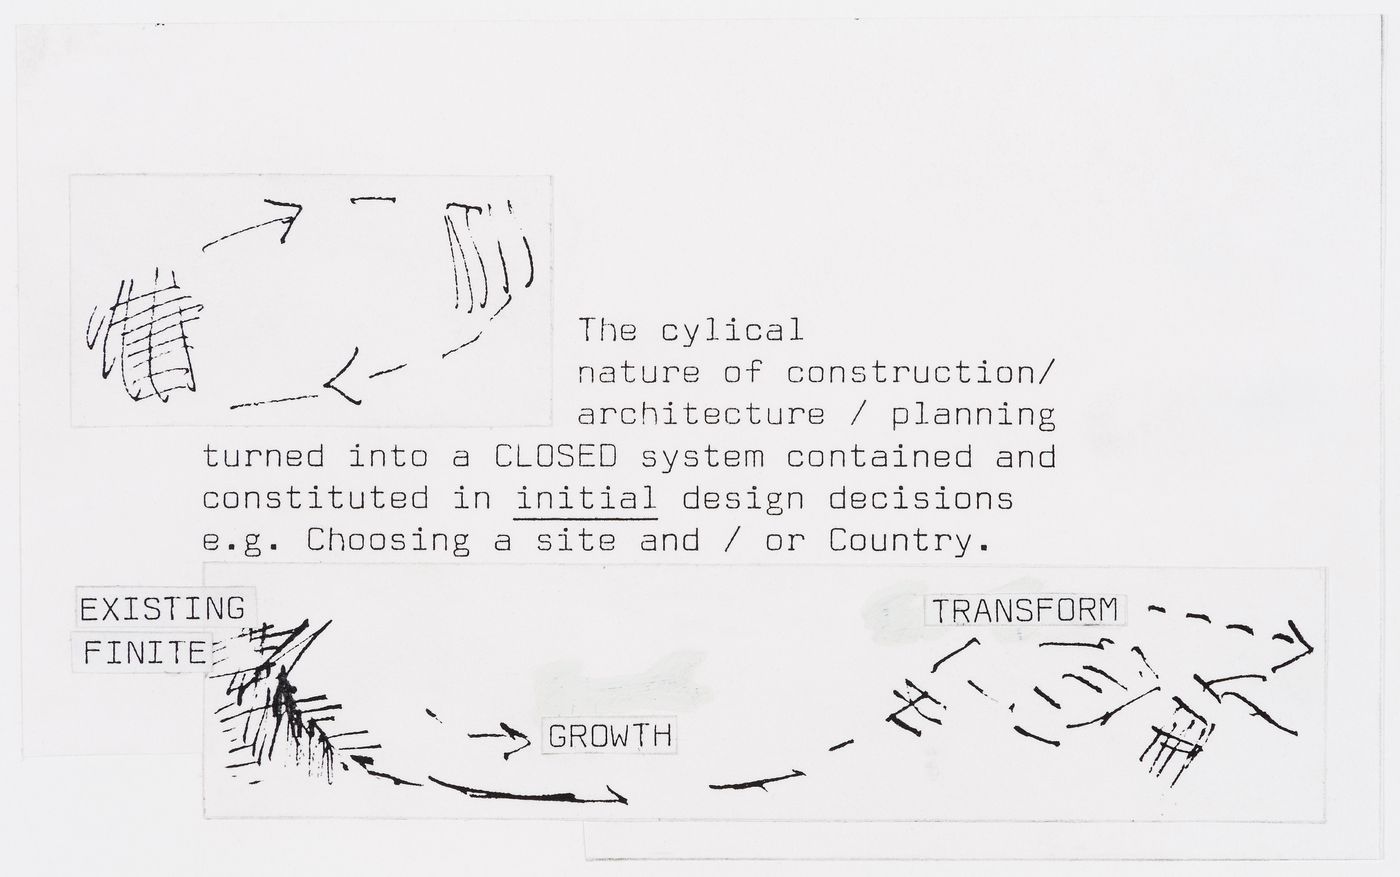 Duck Land: "The cyclical nature of construction/architecture/planning turned into a closed system contained in initial design decisions e.g. choosing a site and/or country"